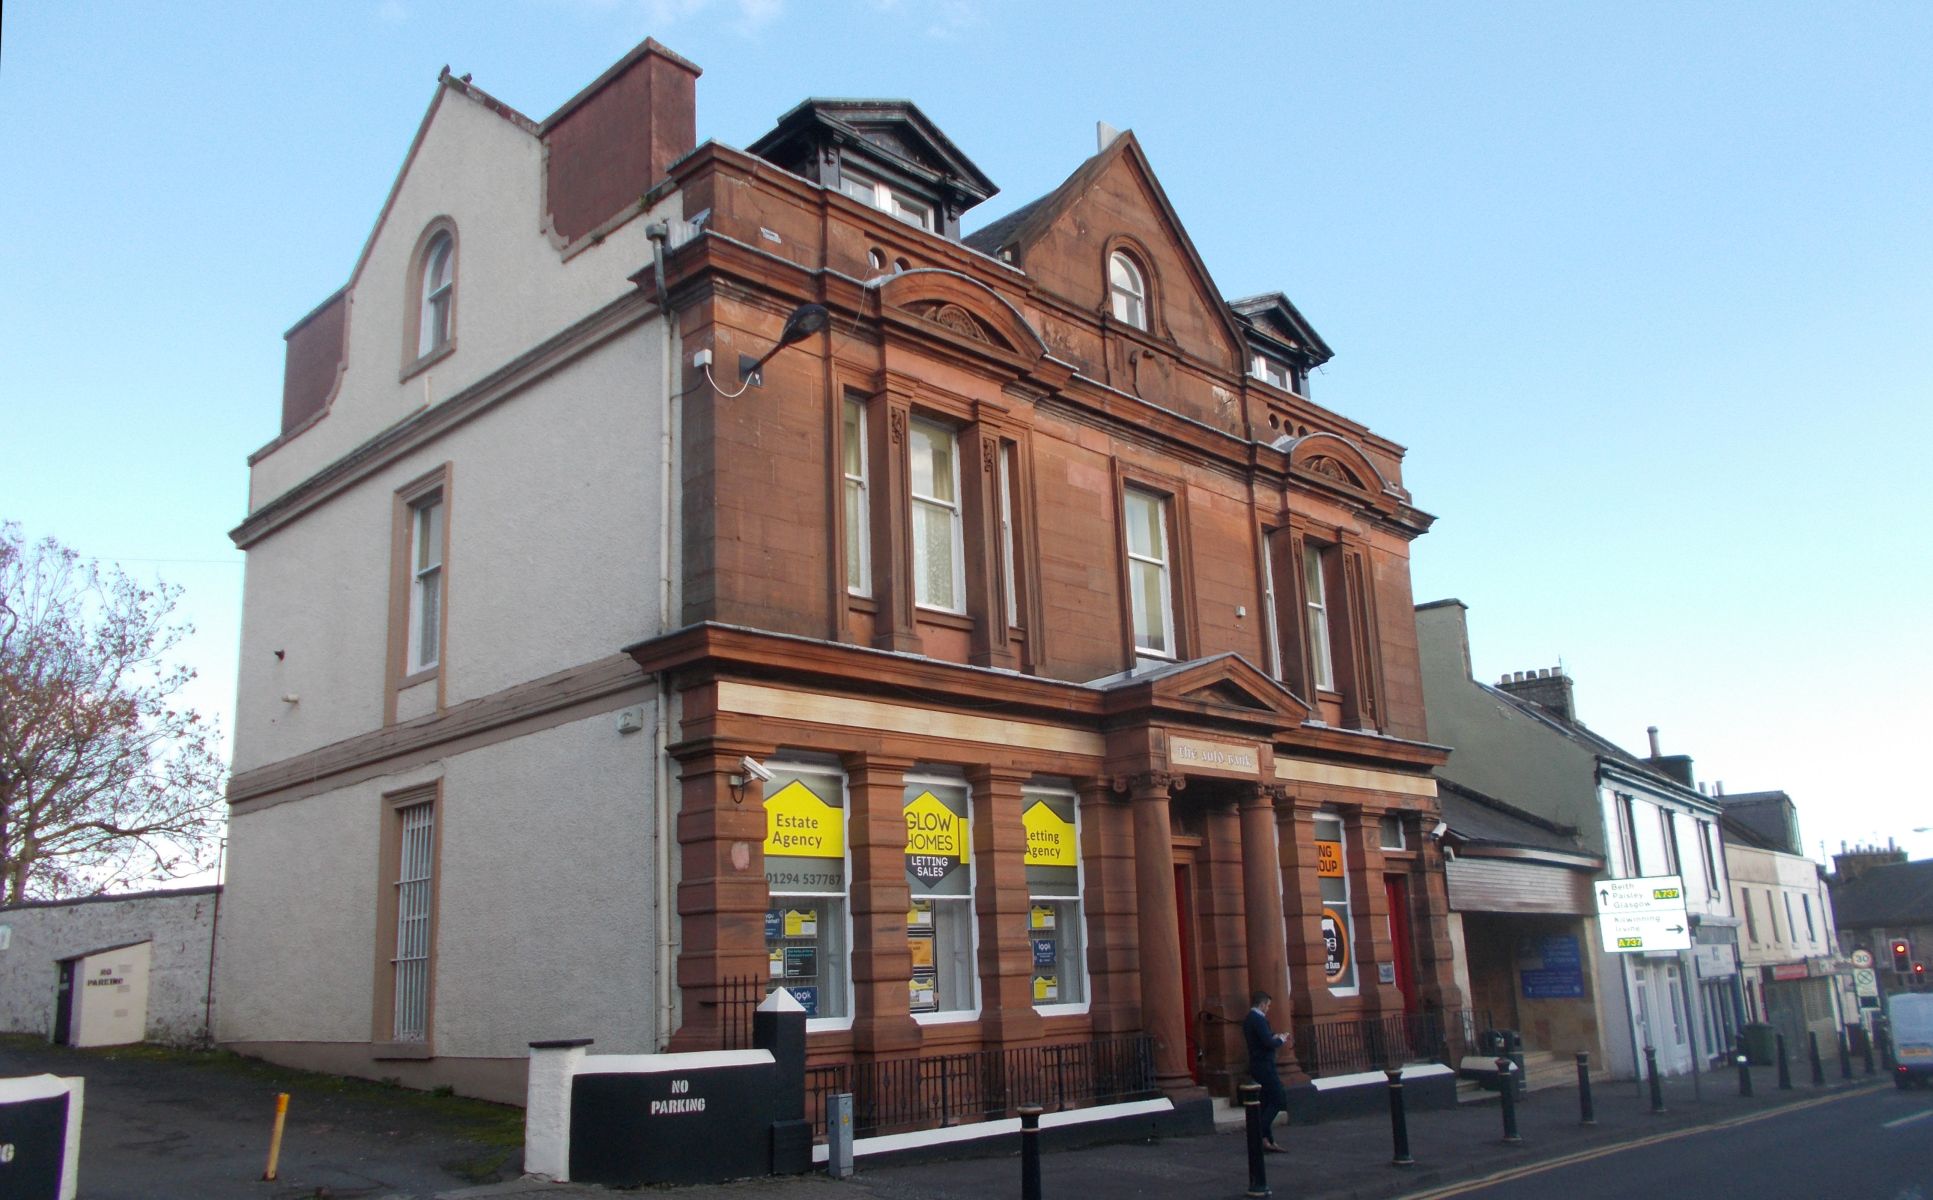 The "Auld Bank" - Red Sandstone Building in Dalry